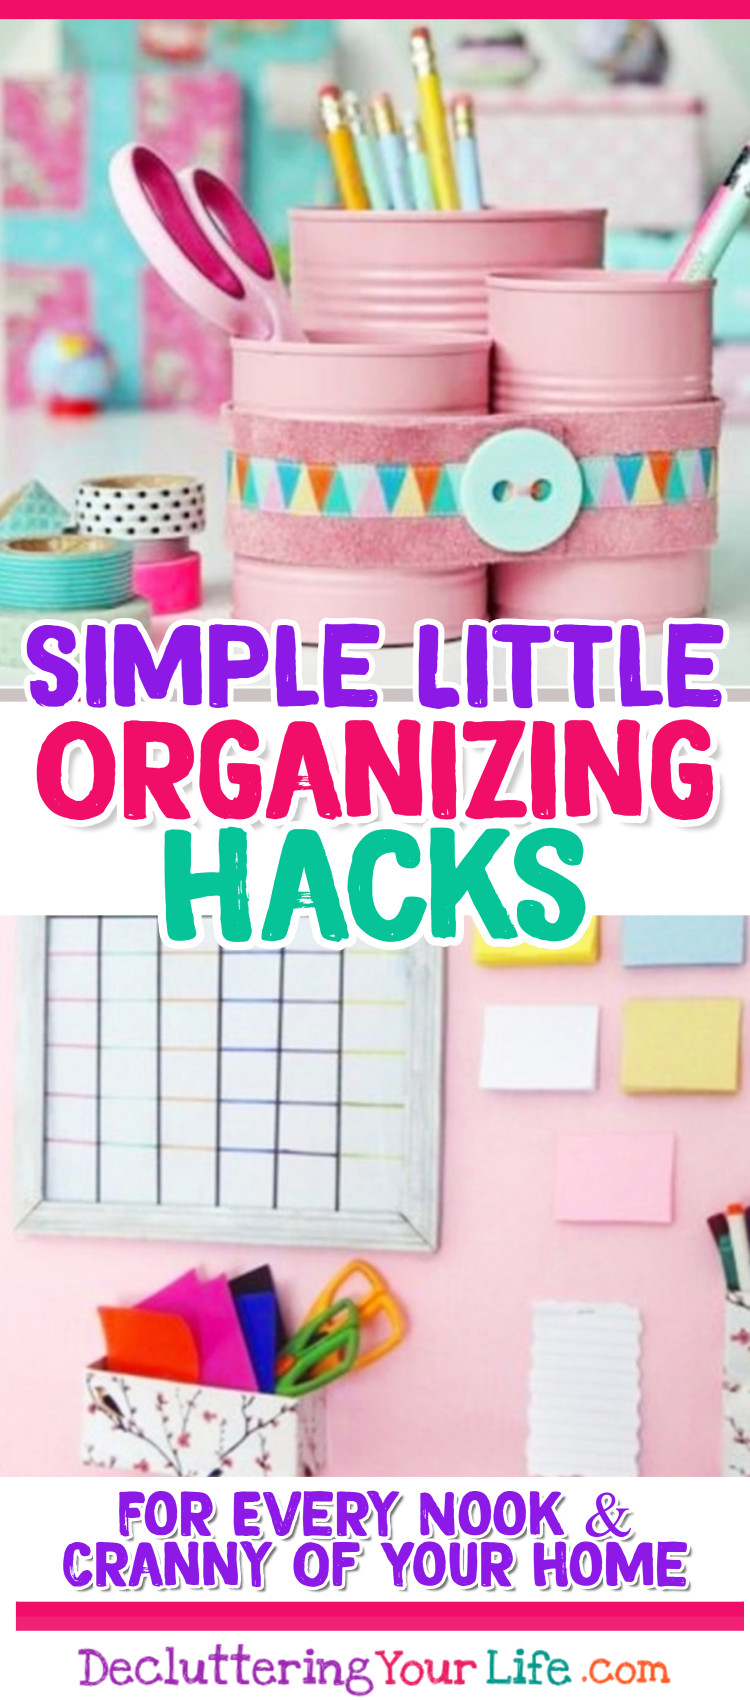 Organization Ideas for the Home - Simple Little Organizing DIY ideas, tips and hacks for every room in your home.